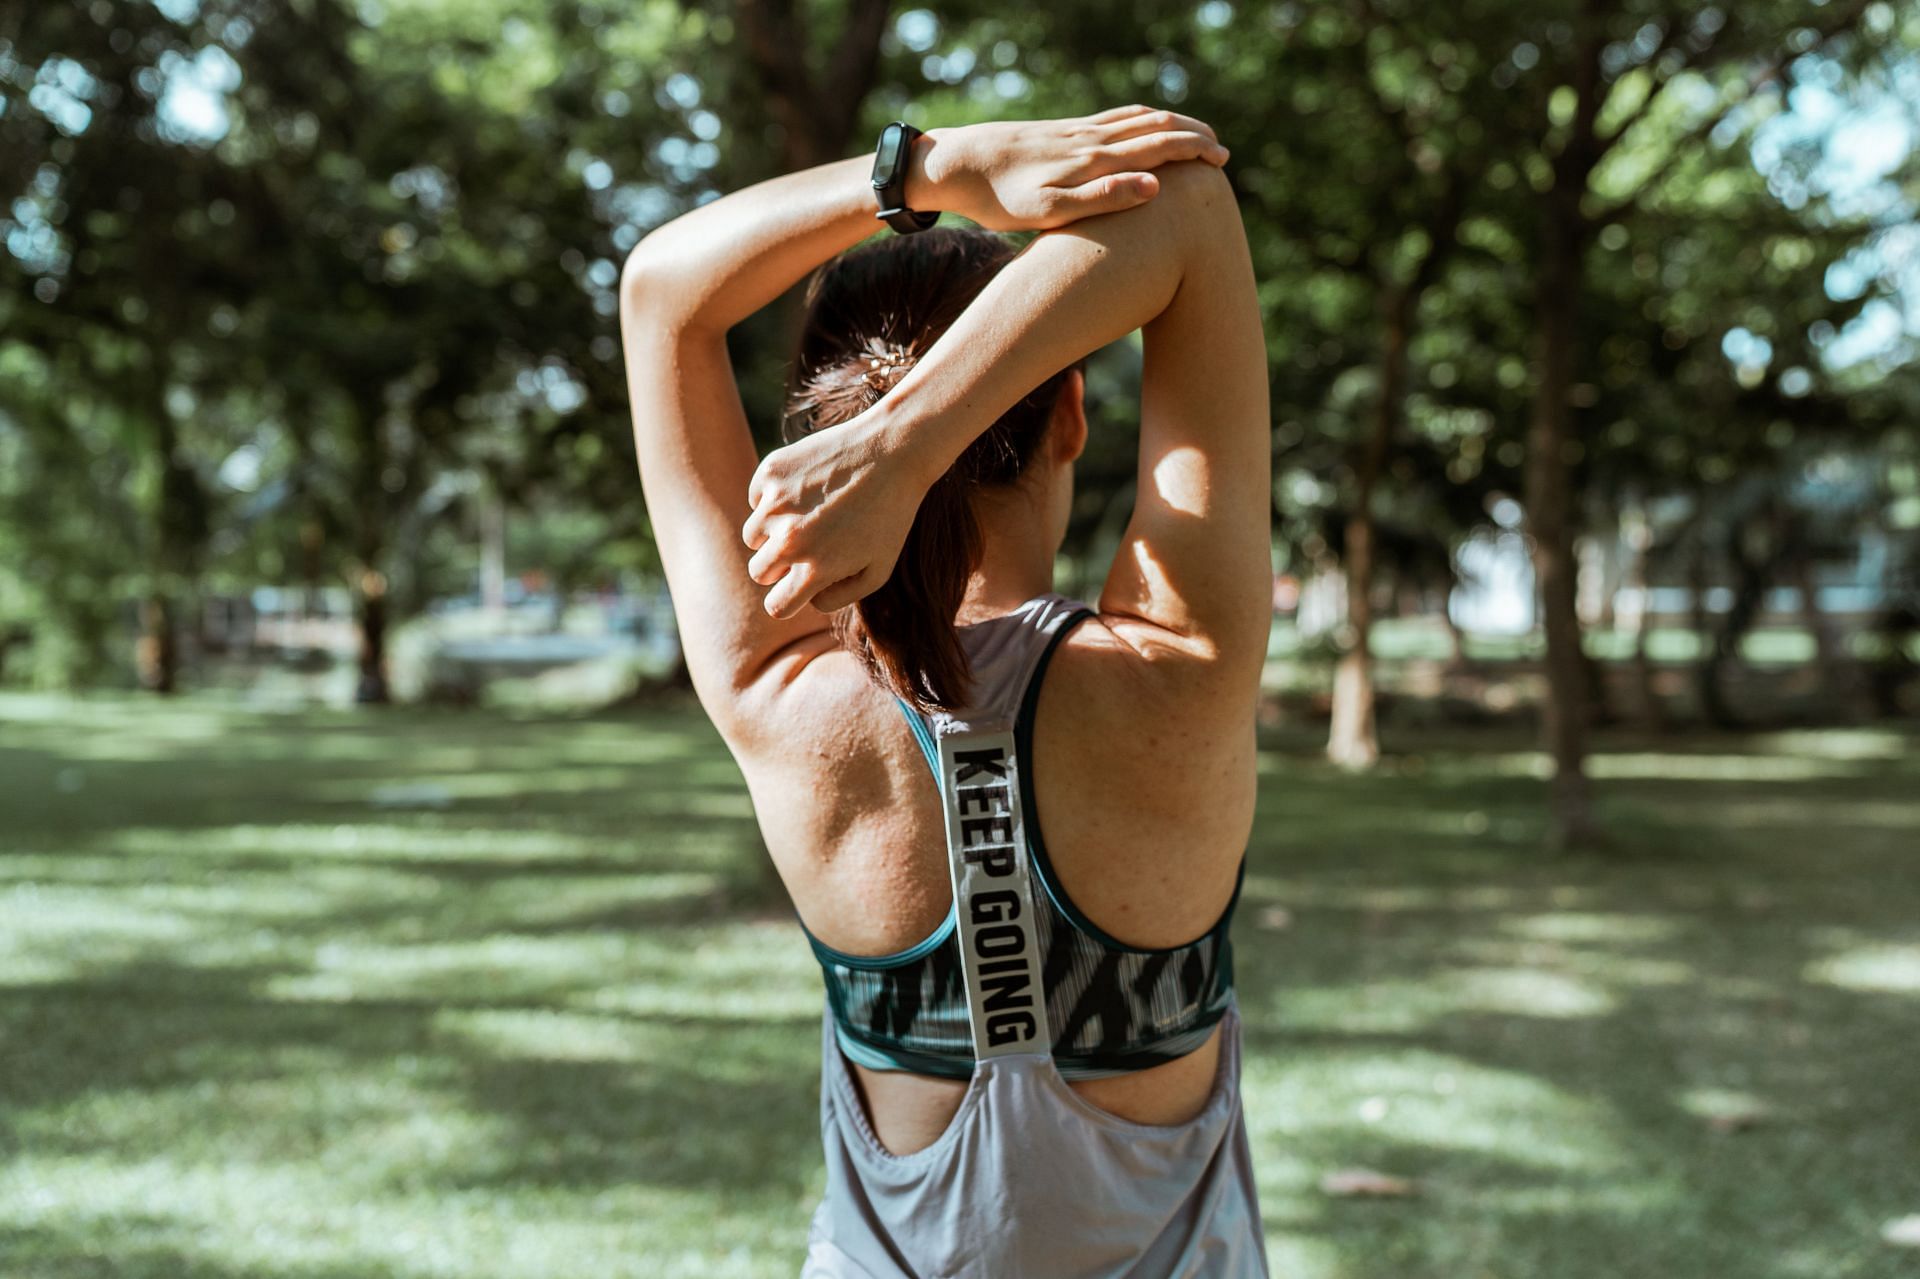 Stretching your muscles is important (Image via Pexels/Ketut Subiyanto)